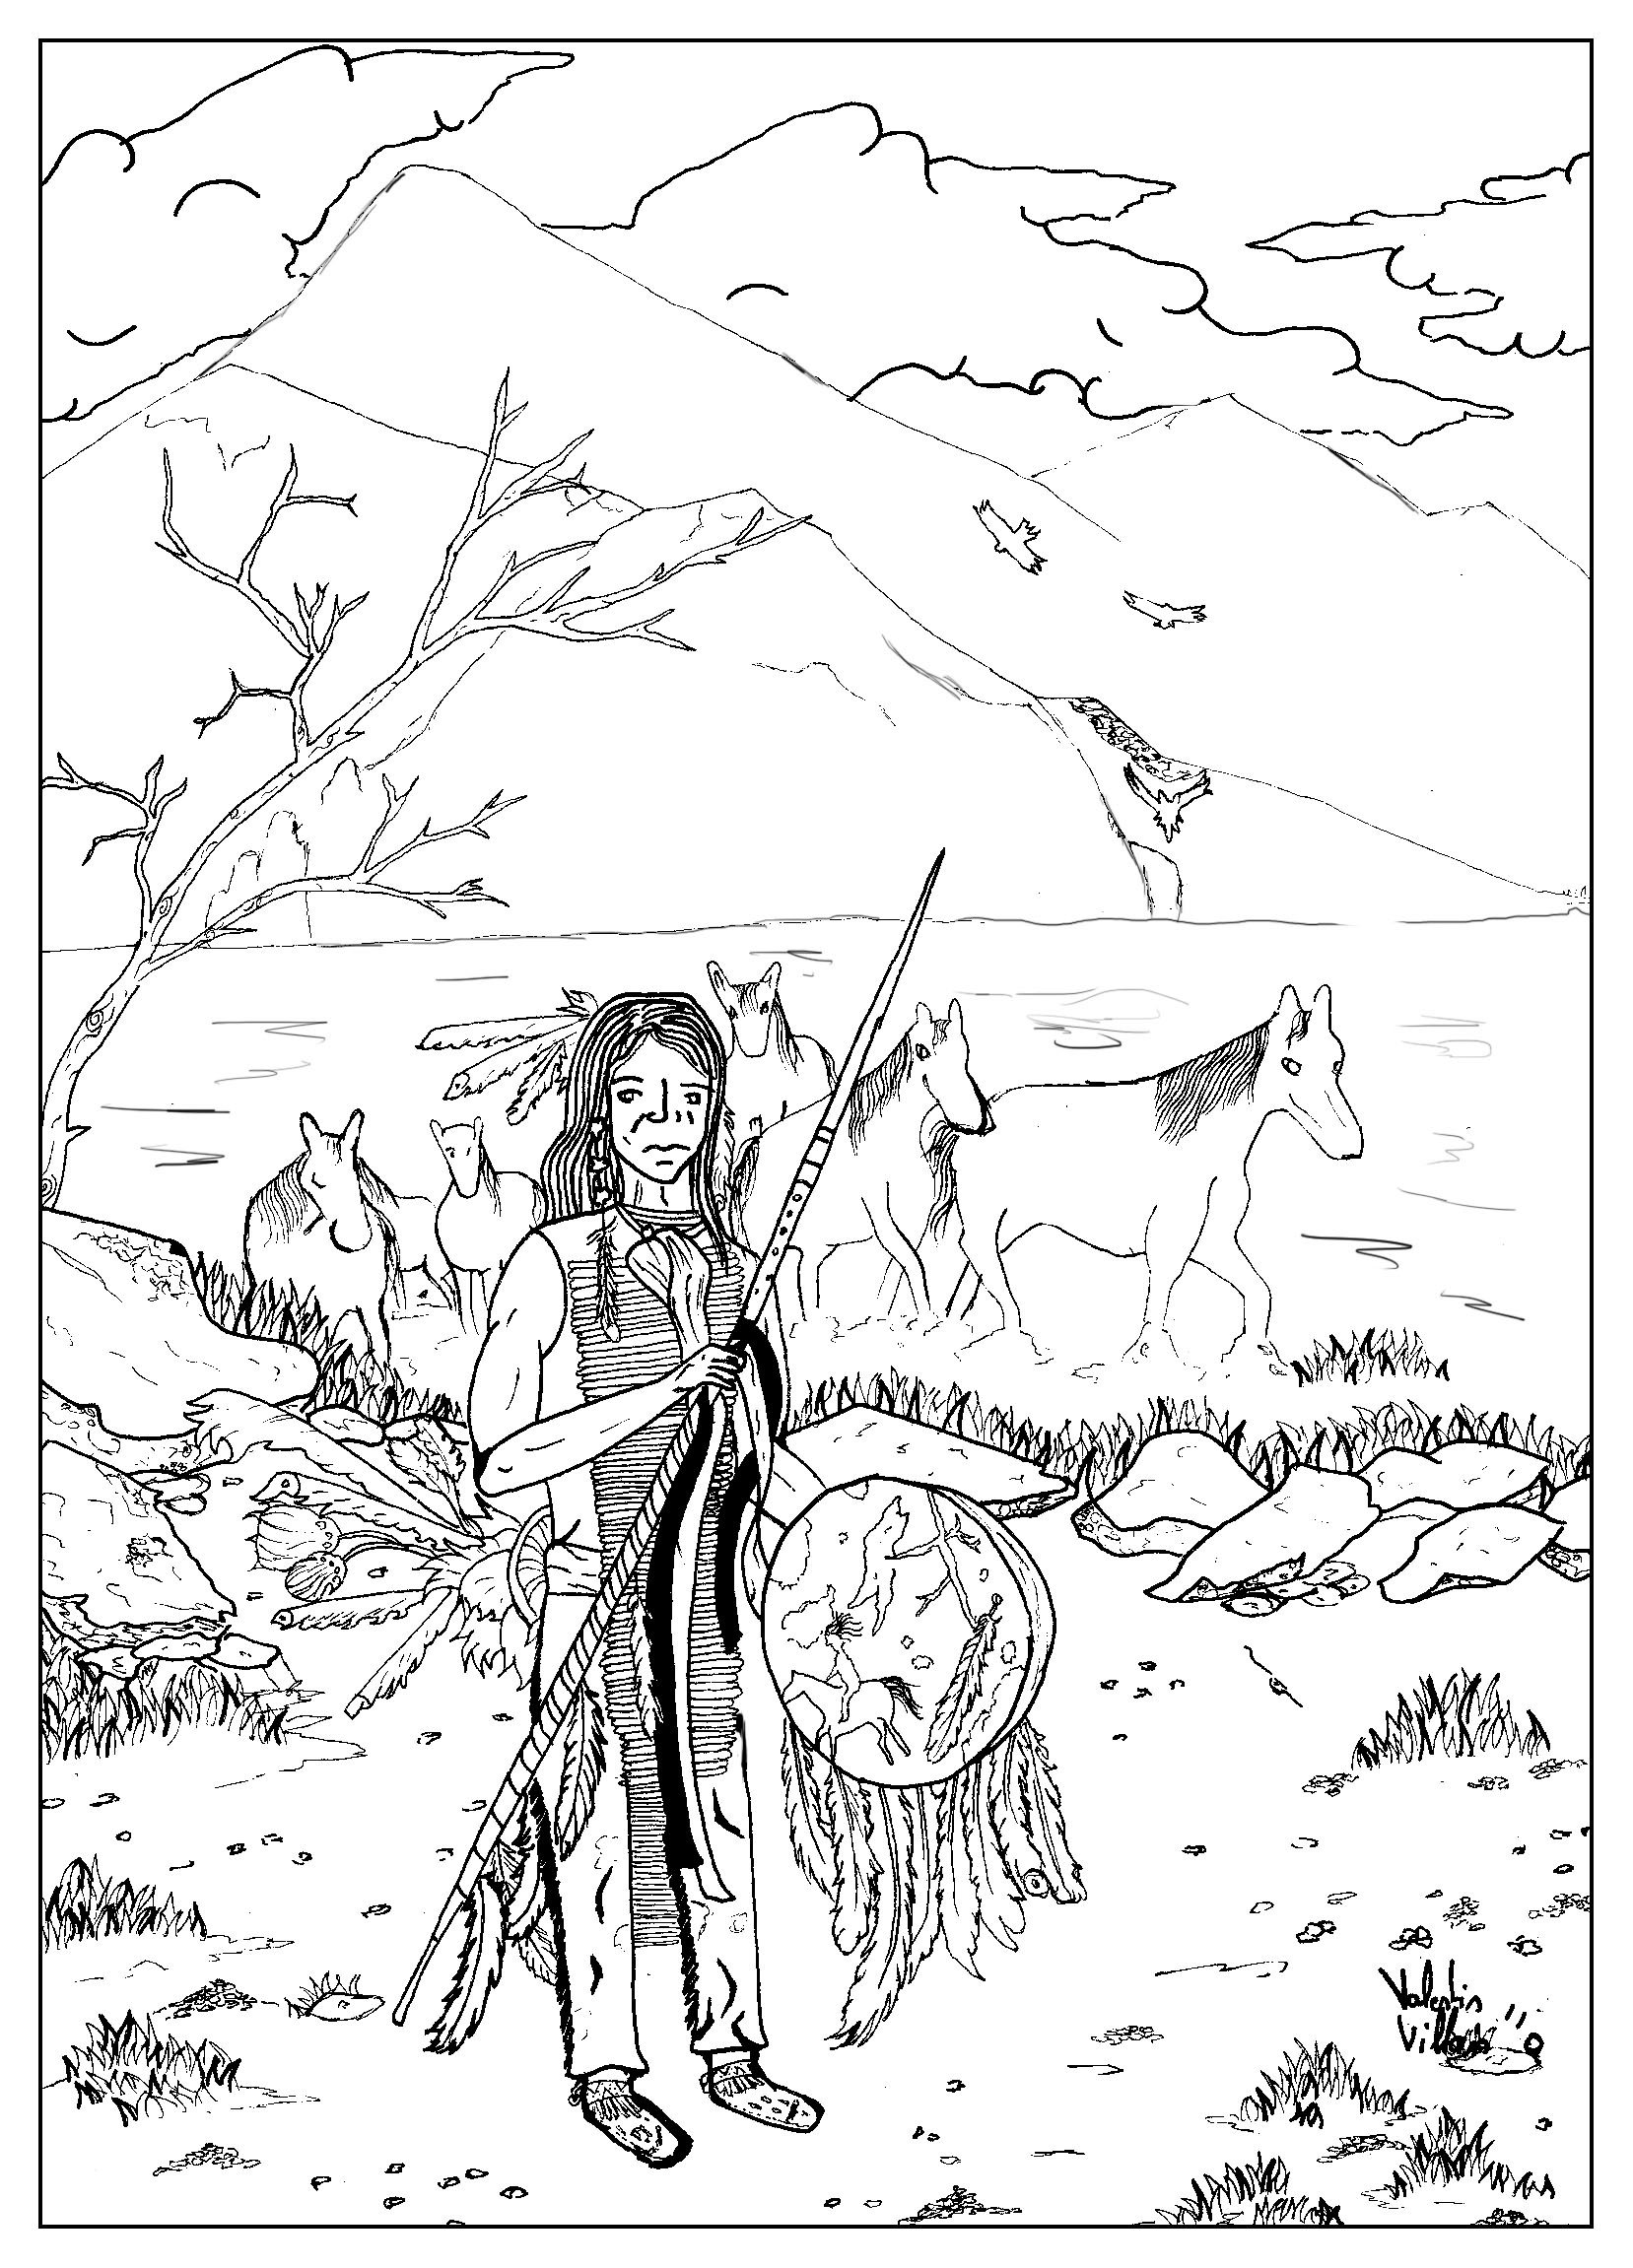 Download Draw native american - Native American Adult Coloring Pages